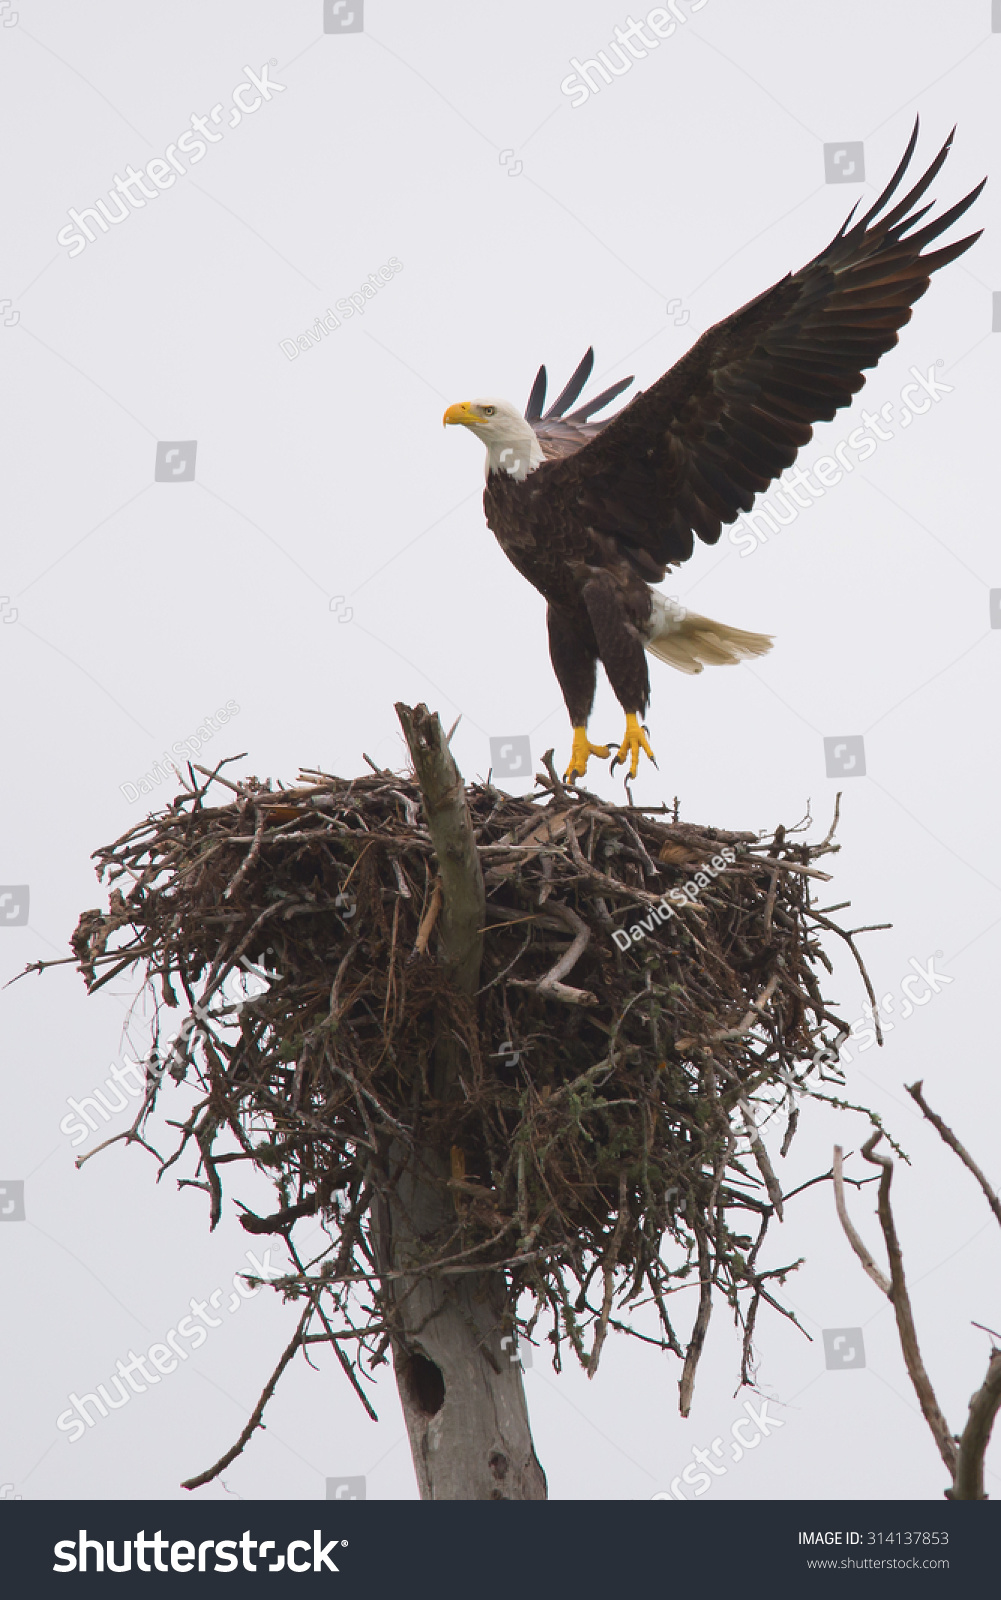 Bald Eagle Stock Photo from Shutterstock